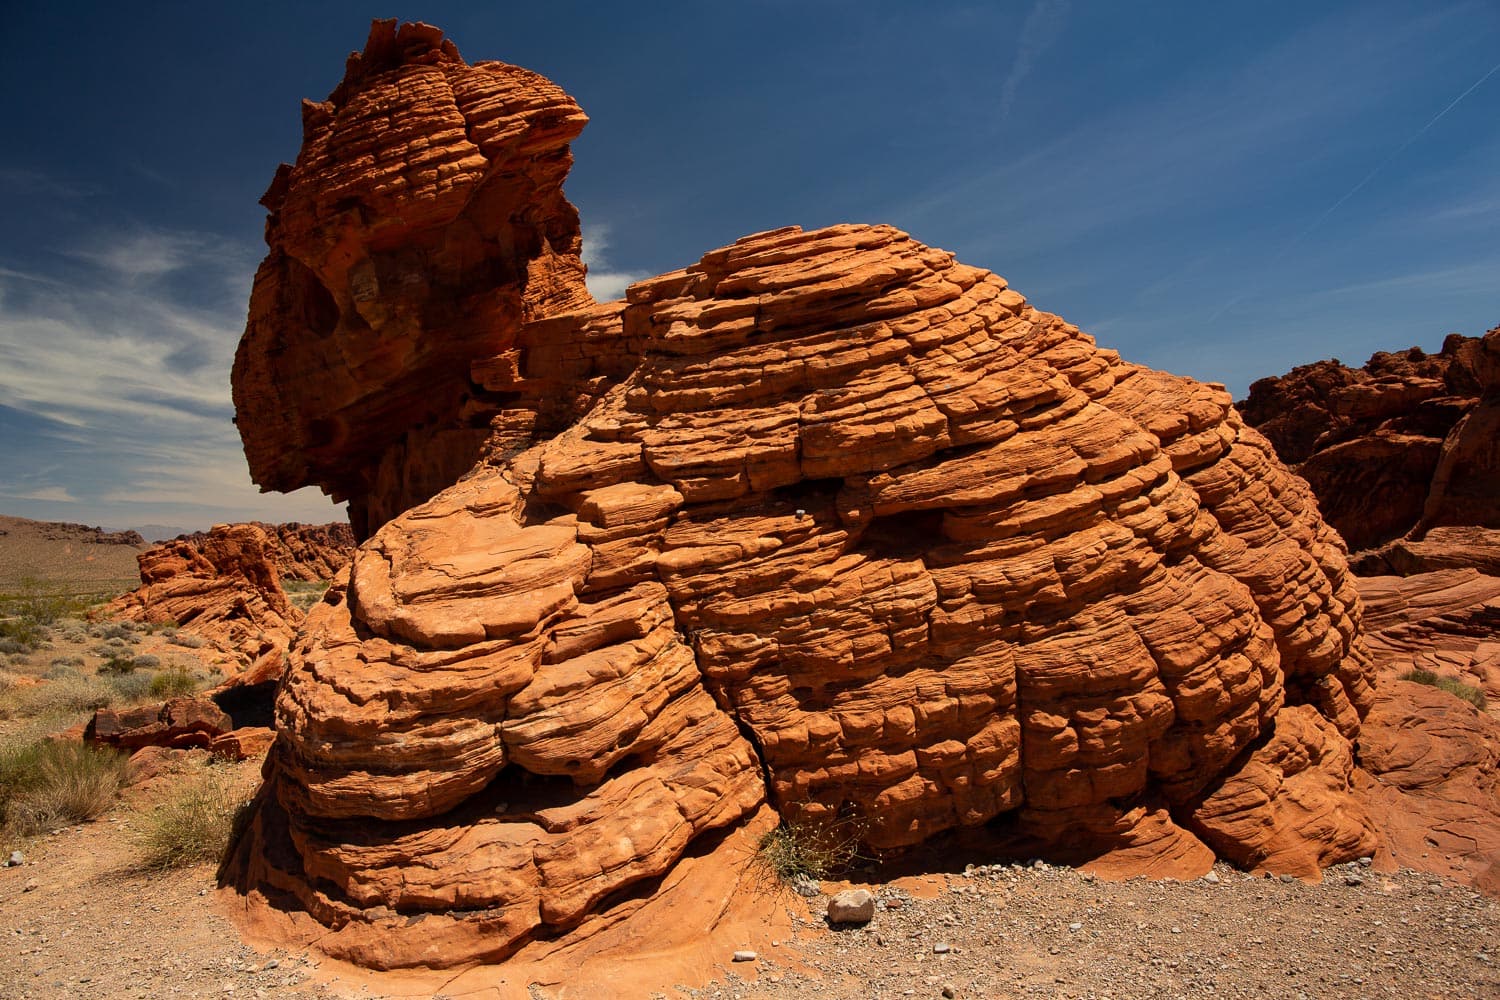 A beehive rock formation in Valley of Fire state park.